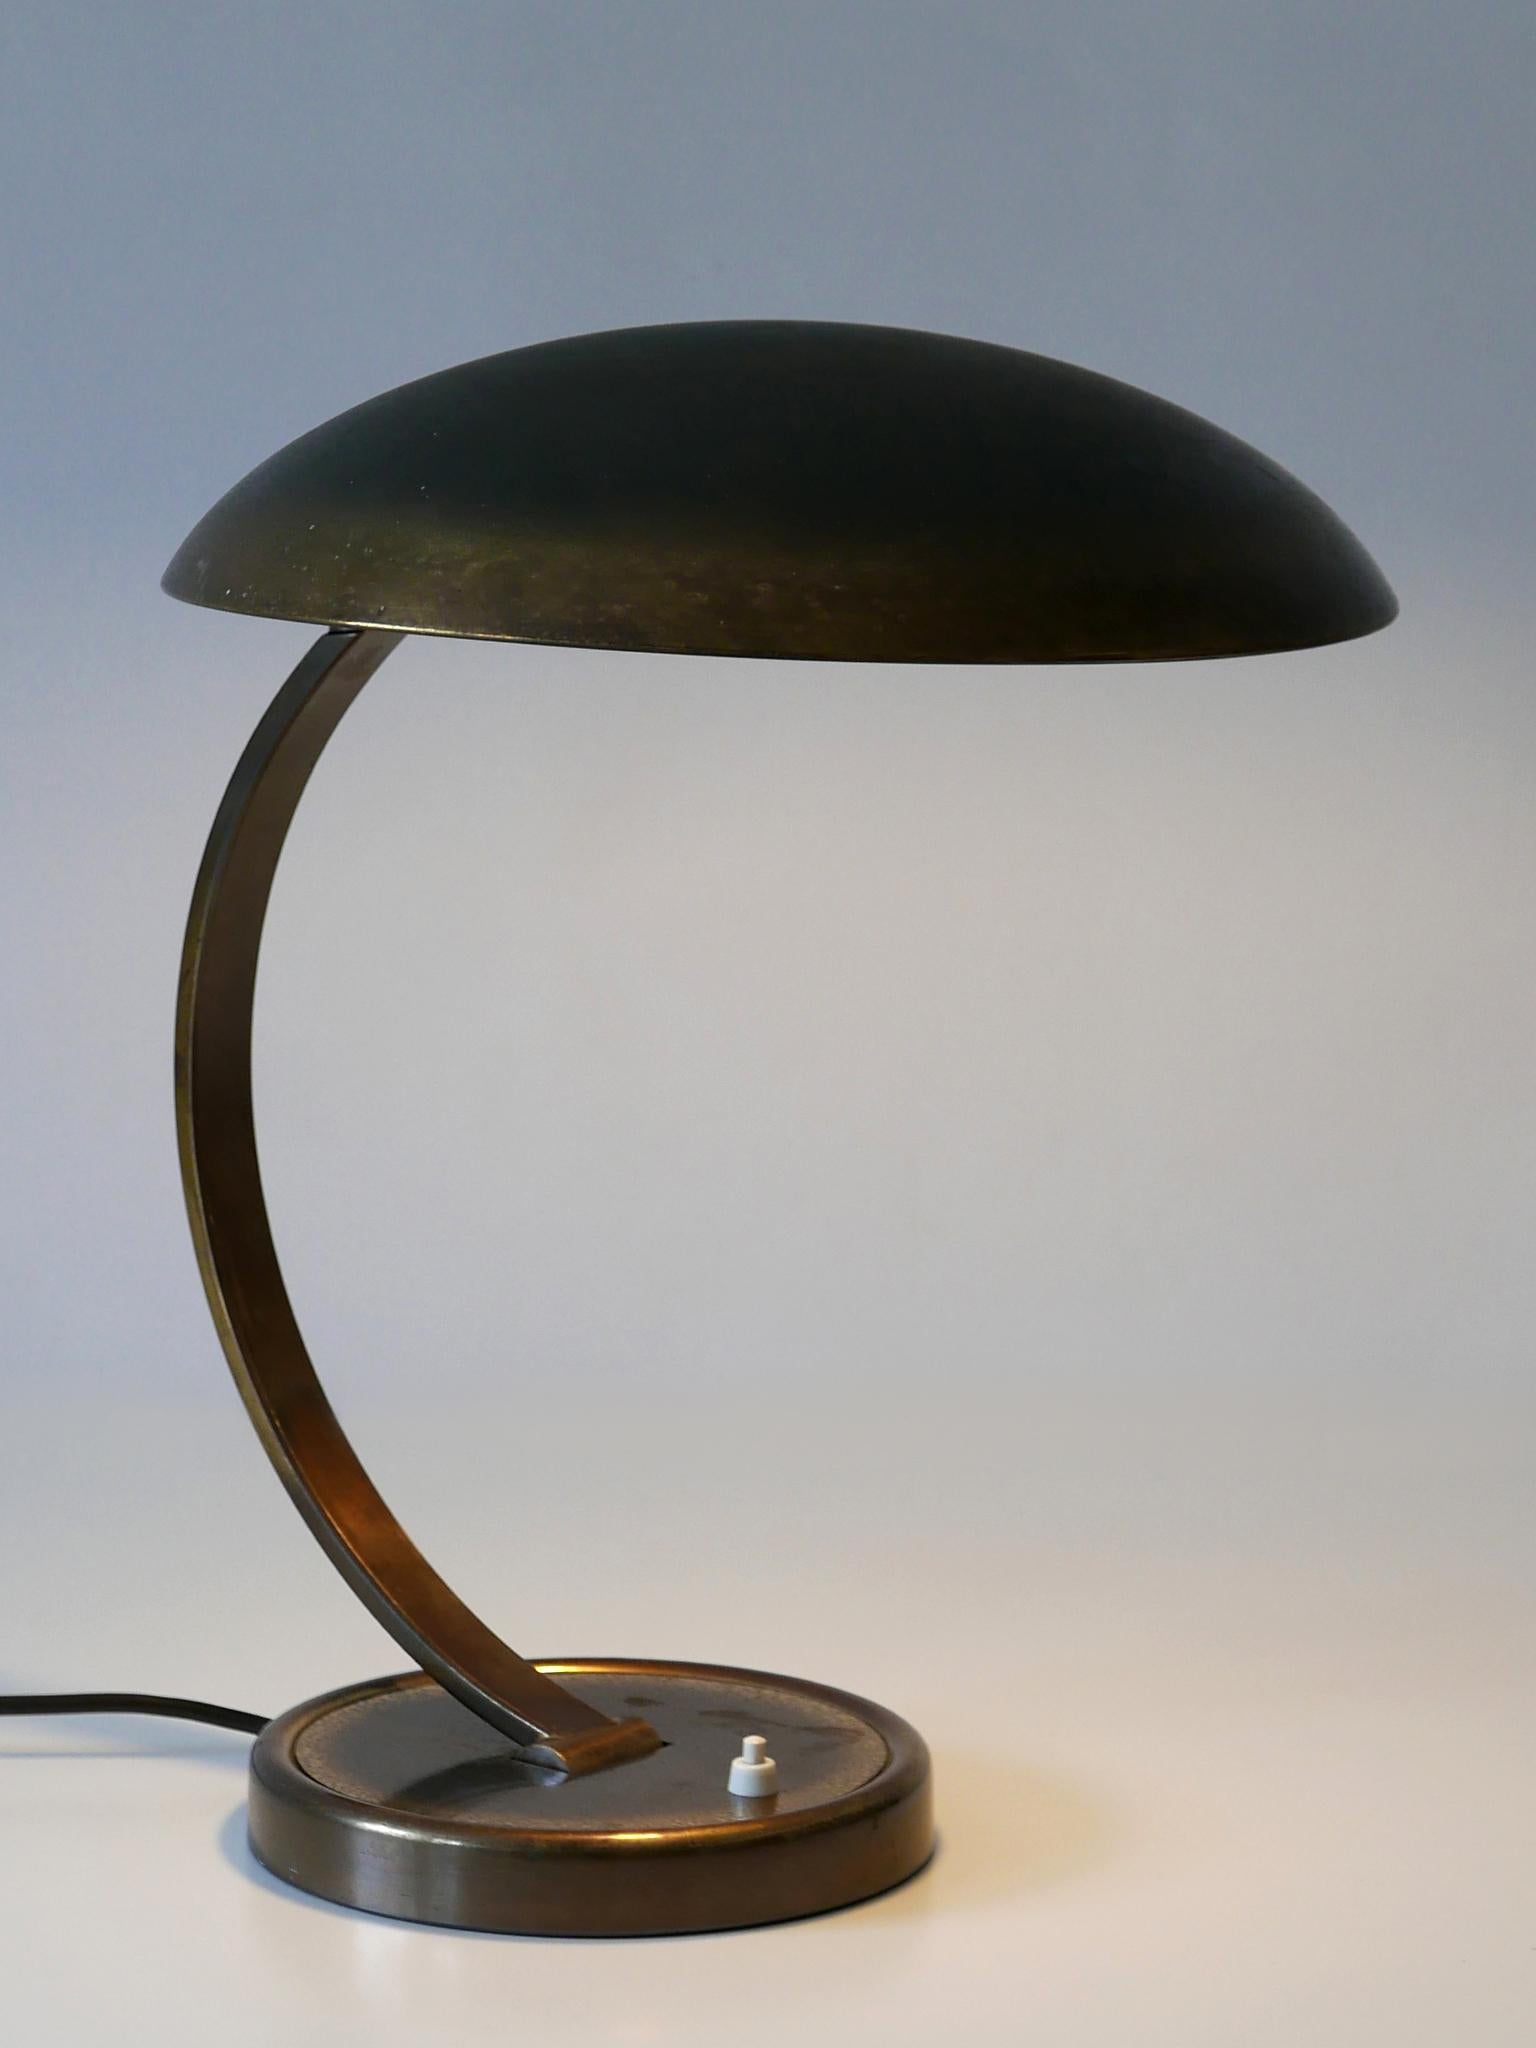 Elegant, articulated desk light or table lamp. Model 6751. Adjustable and rotating arms and shades. Designed by Christian Dell for Kaiser Idell, 1950s, Germany.

Executed in patinated brass, the lamp needs 1 x E27 / E26 Edison screw fit bulb, is